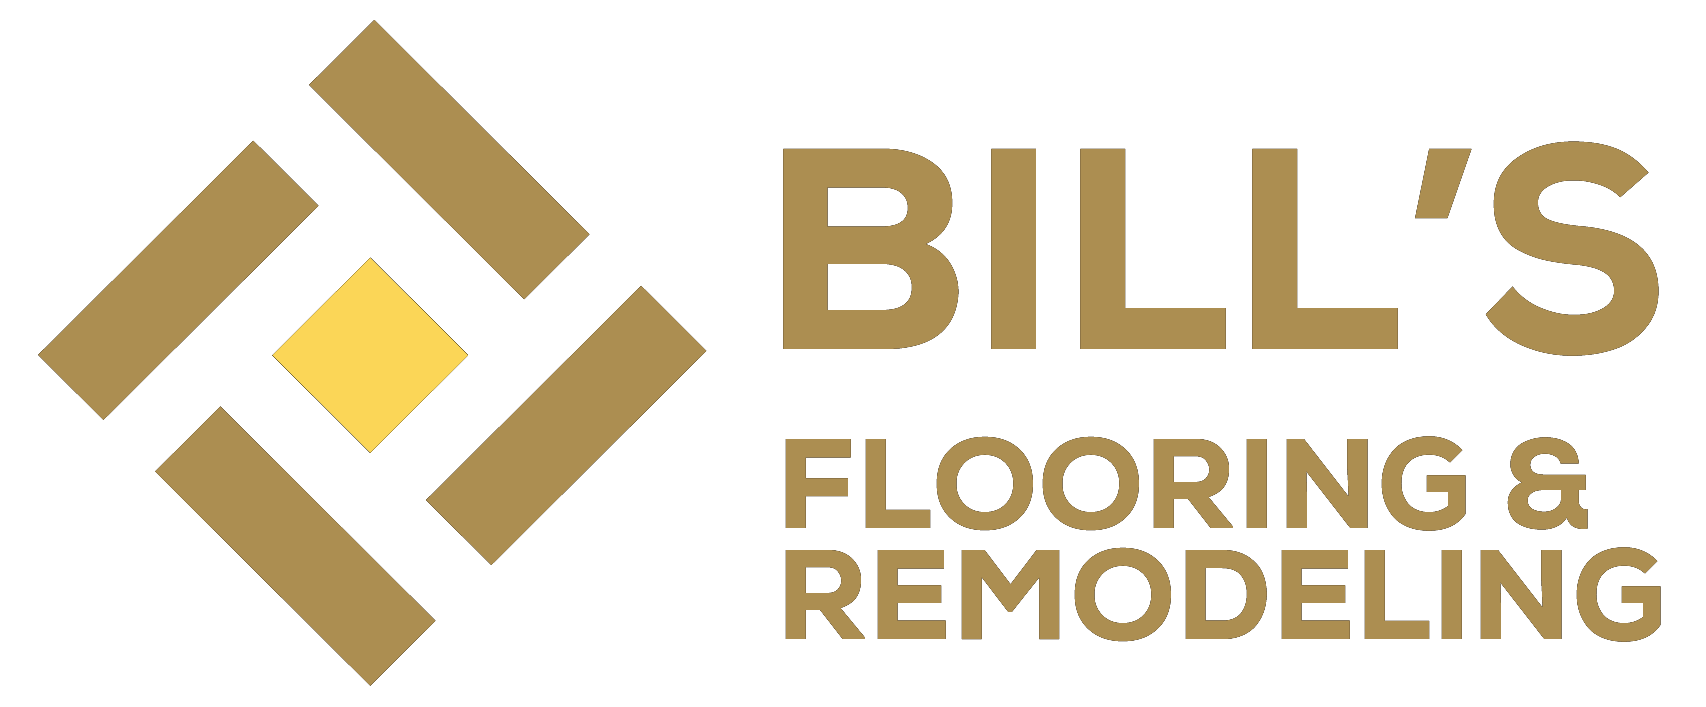 Bill’s Flooring and Remodeling